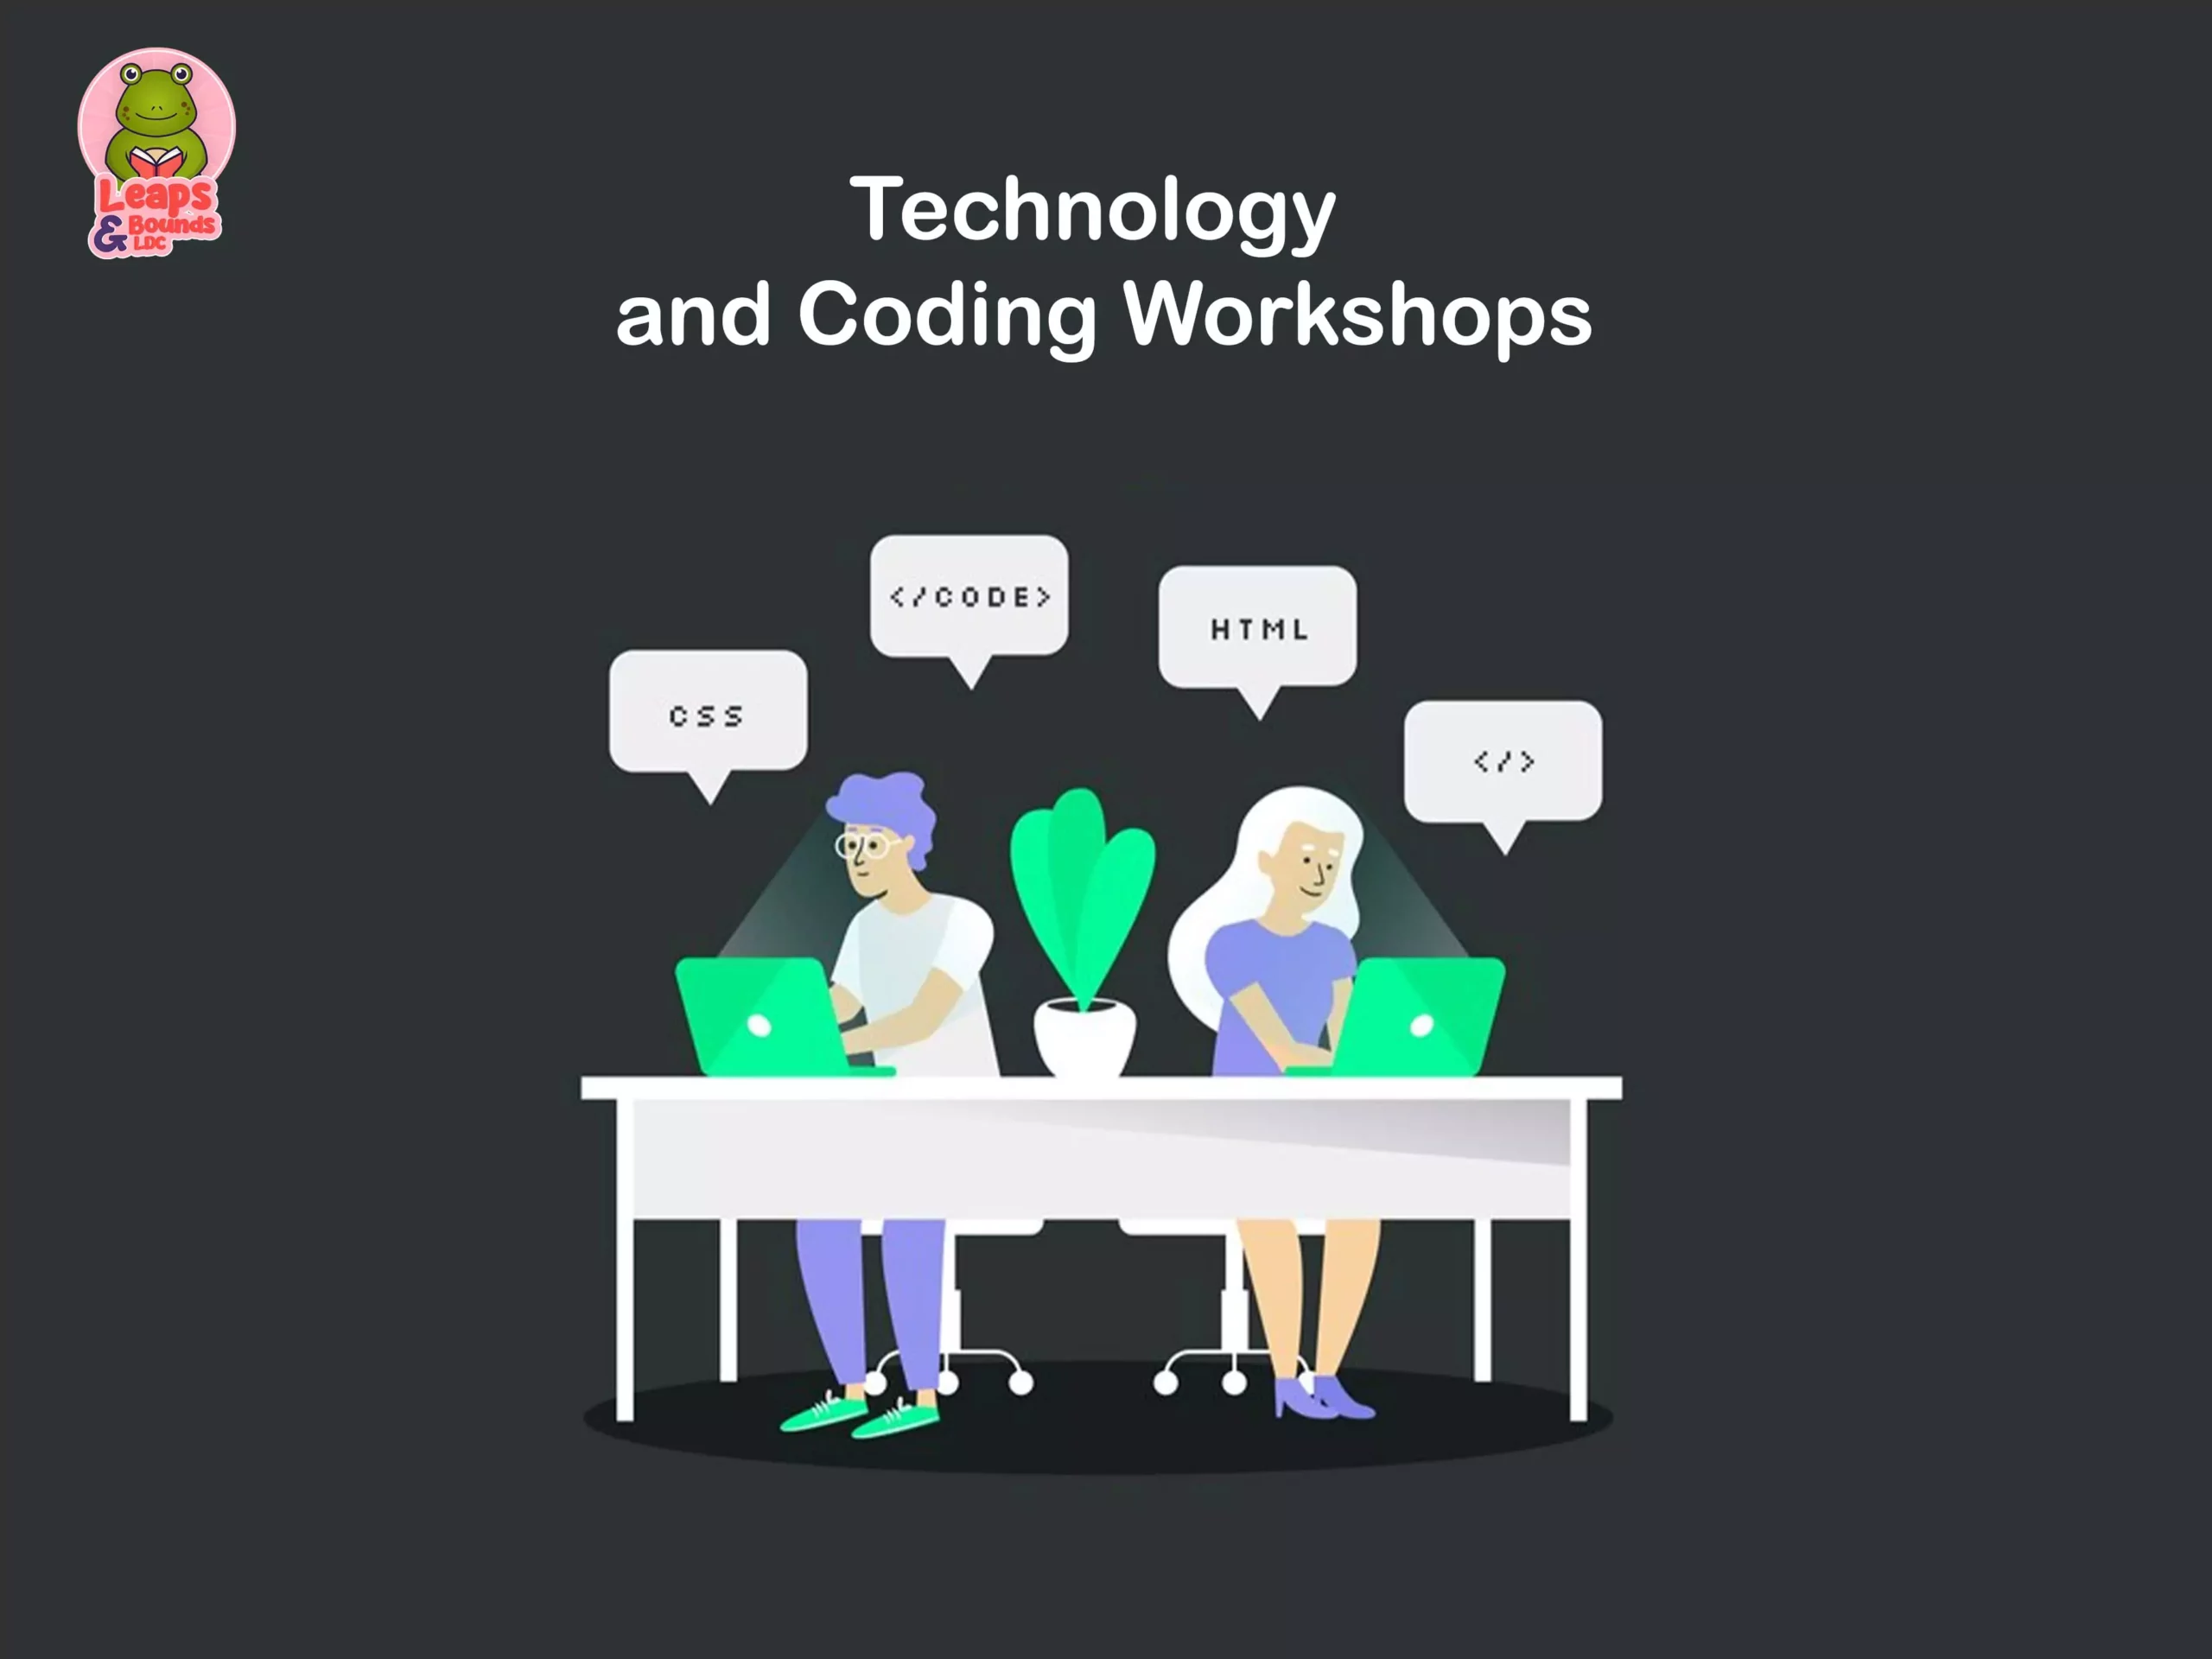 Technology and Coding Workshops